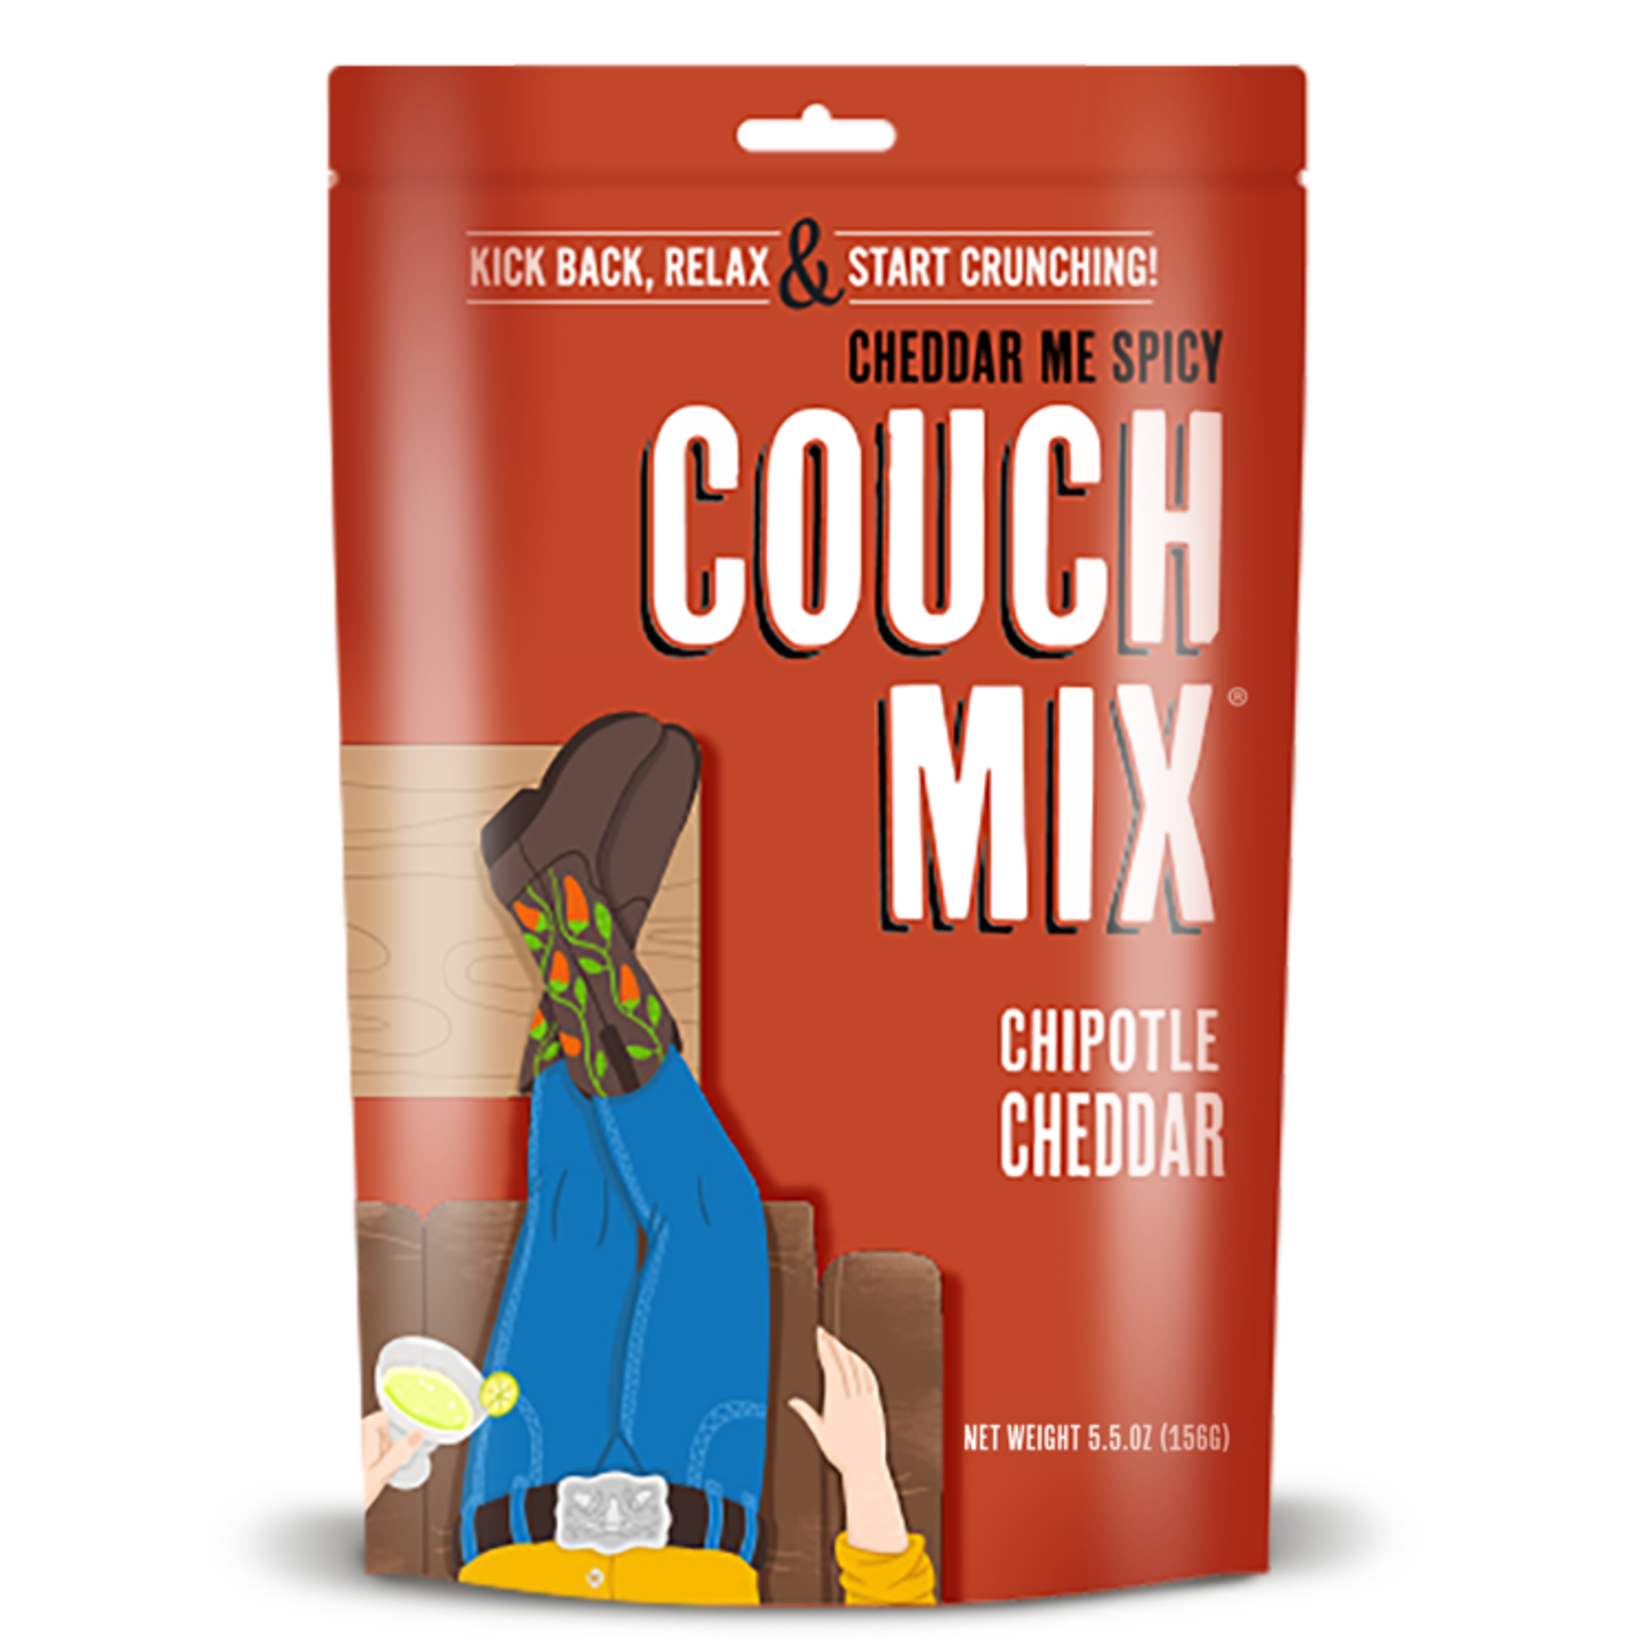 Chipotle Cheddar Couch Mix 5.5 oz